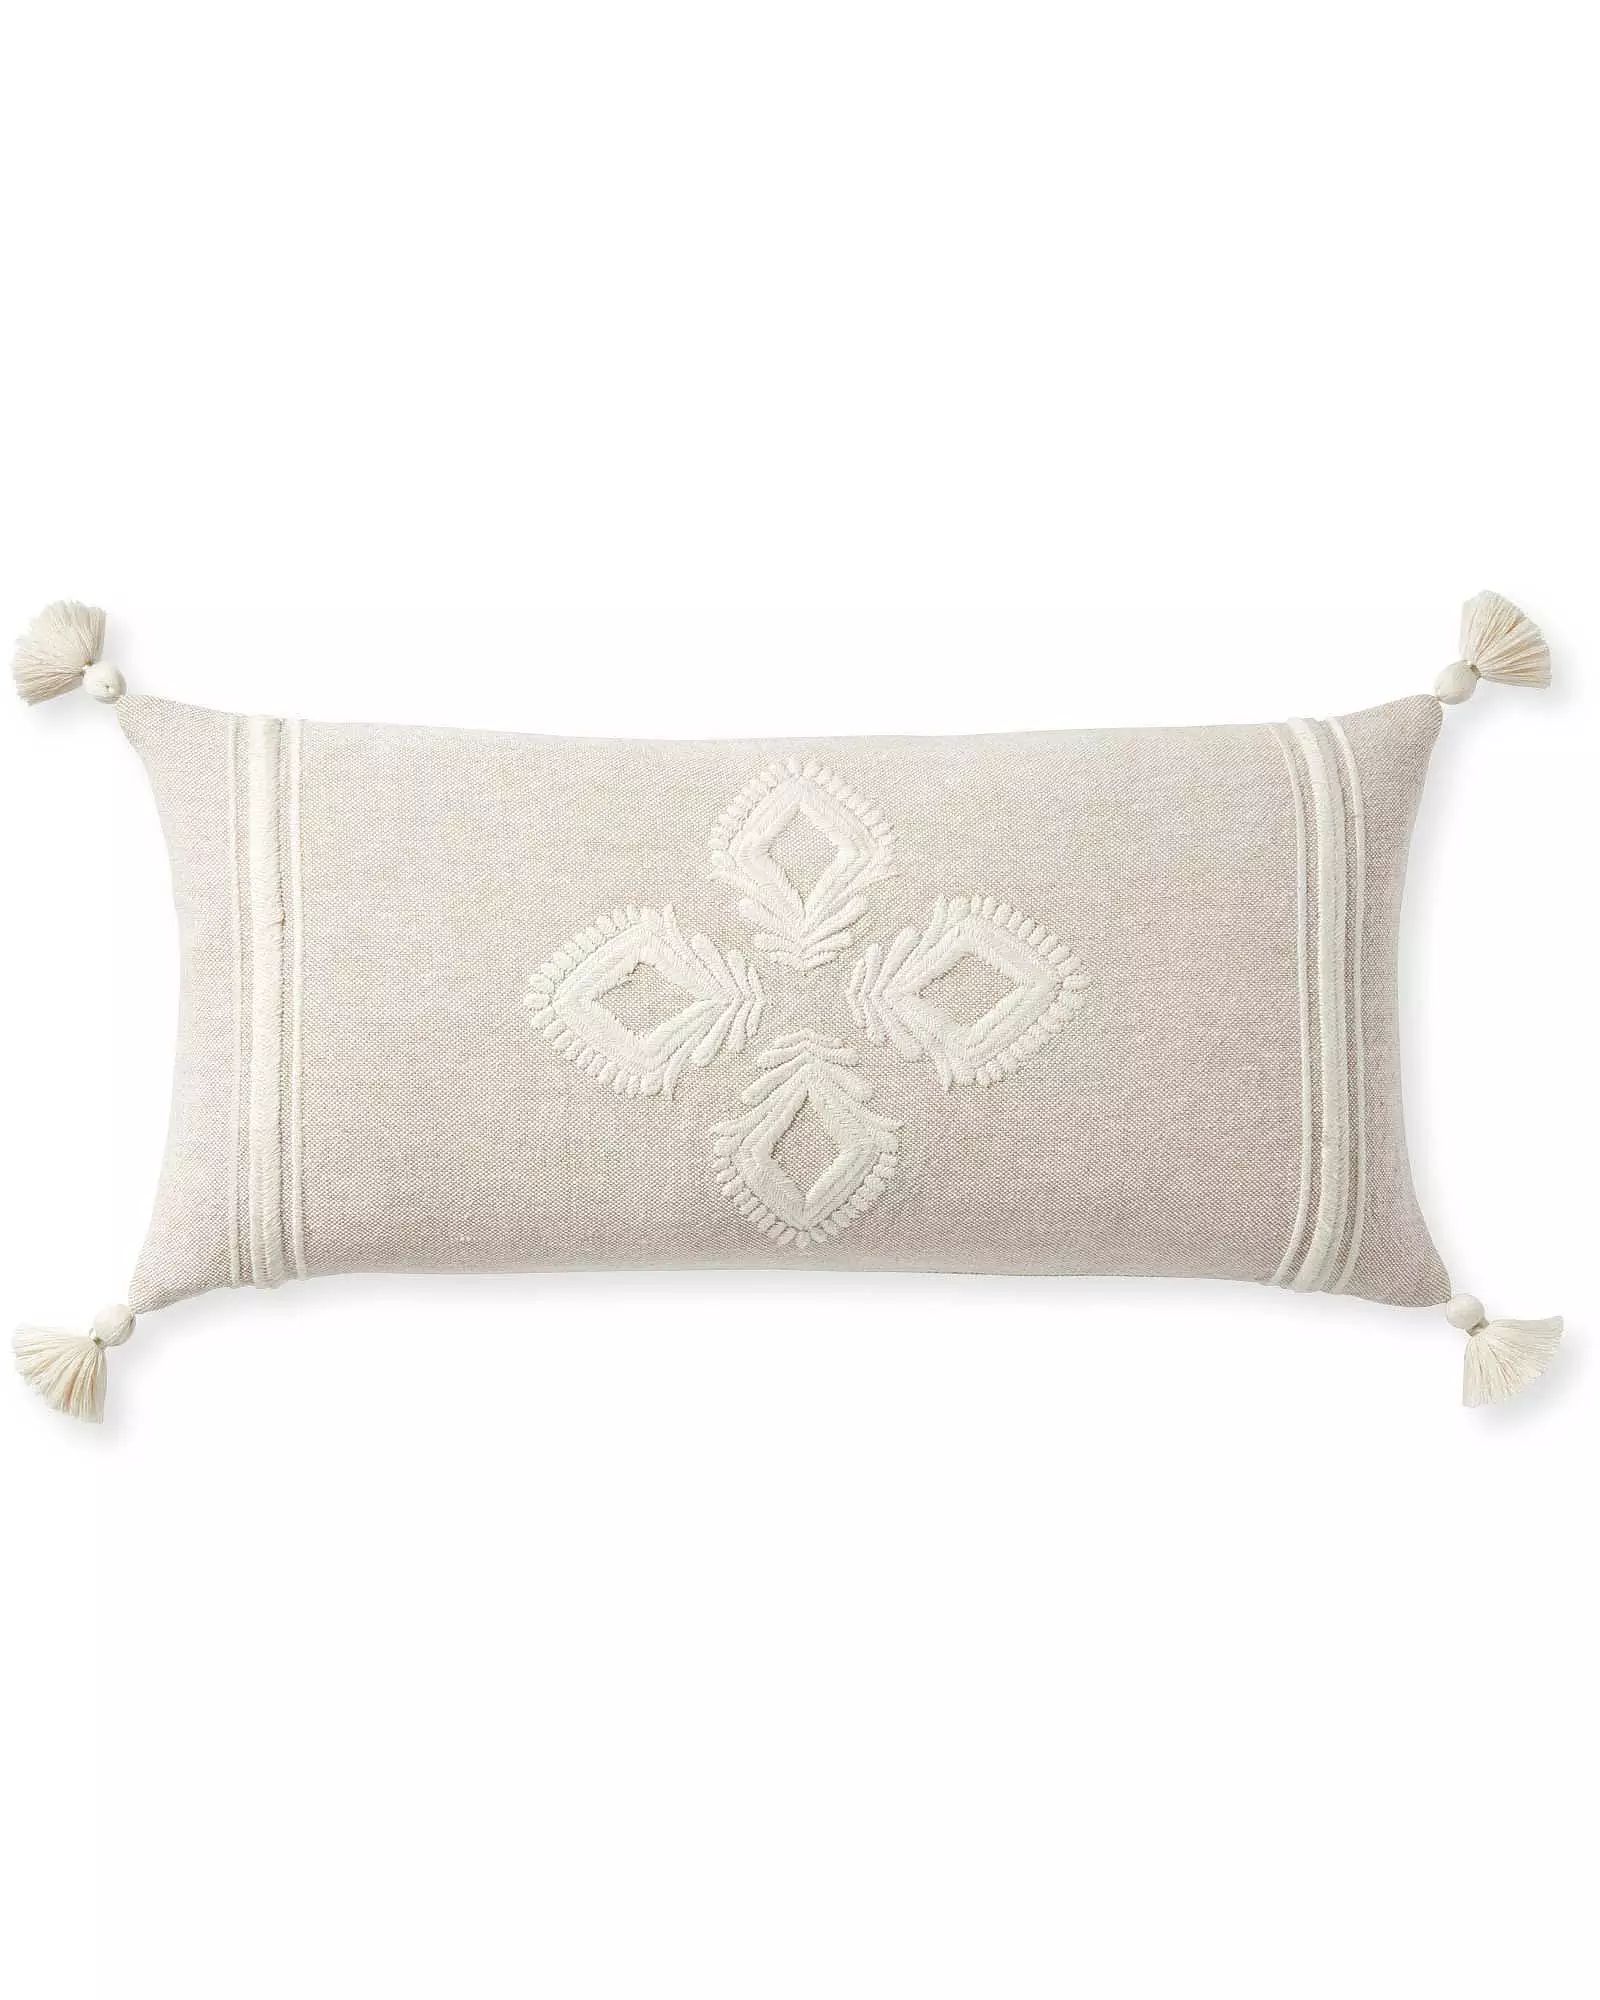 Leighton Pillow Cover | Serena and Lily